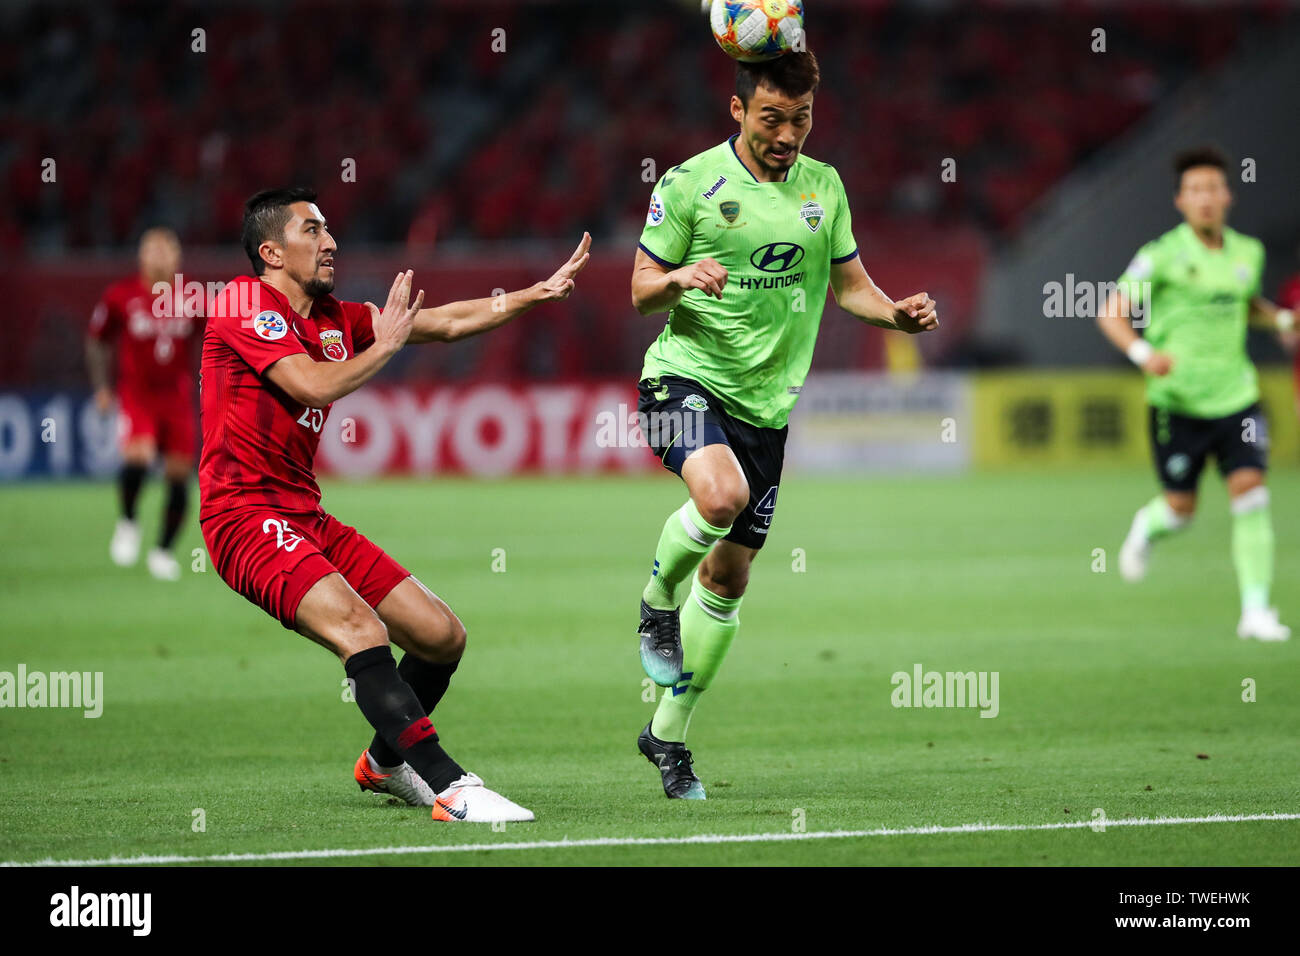 Shin Hyung-min, right, of South Korea's Jeonbuk Hyundai Motors FC heads the ball against Uzbek football player Odil Ahmedov of Shanghai SIPG in the eighth-final match during the 2019 AFC Champions League in Shanghai, China, 19 June 2019. Two-time champions Jeonbuk Hyundai Motors will take an advantage into the second leg of their 2019 AFC Champions League (ACL) Round of 16 game with Shanghai SIPG FC next week after netting an away goal in their 1-1 draw in Shanghai on Wednesday. Stock Photo